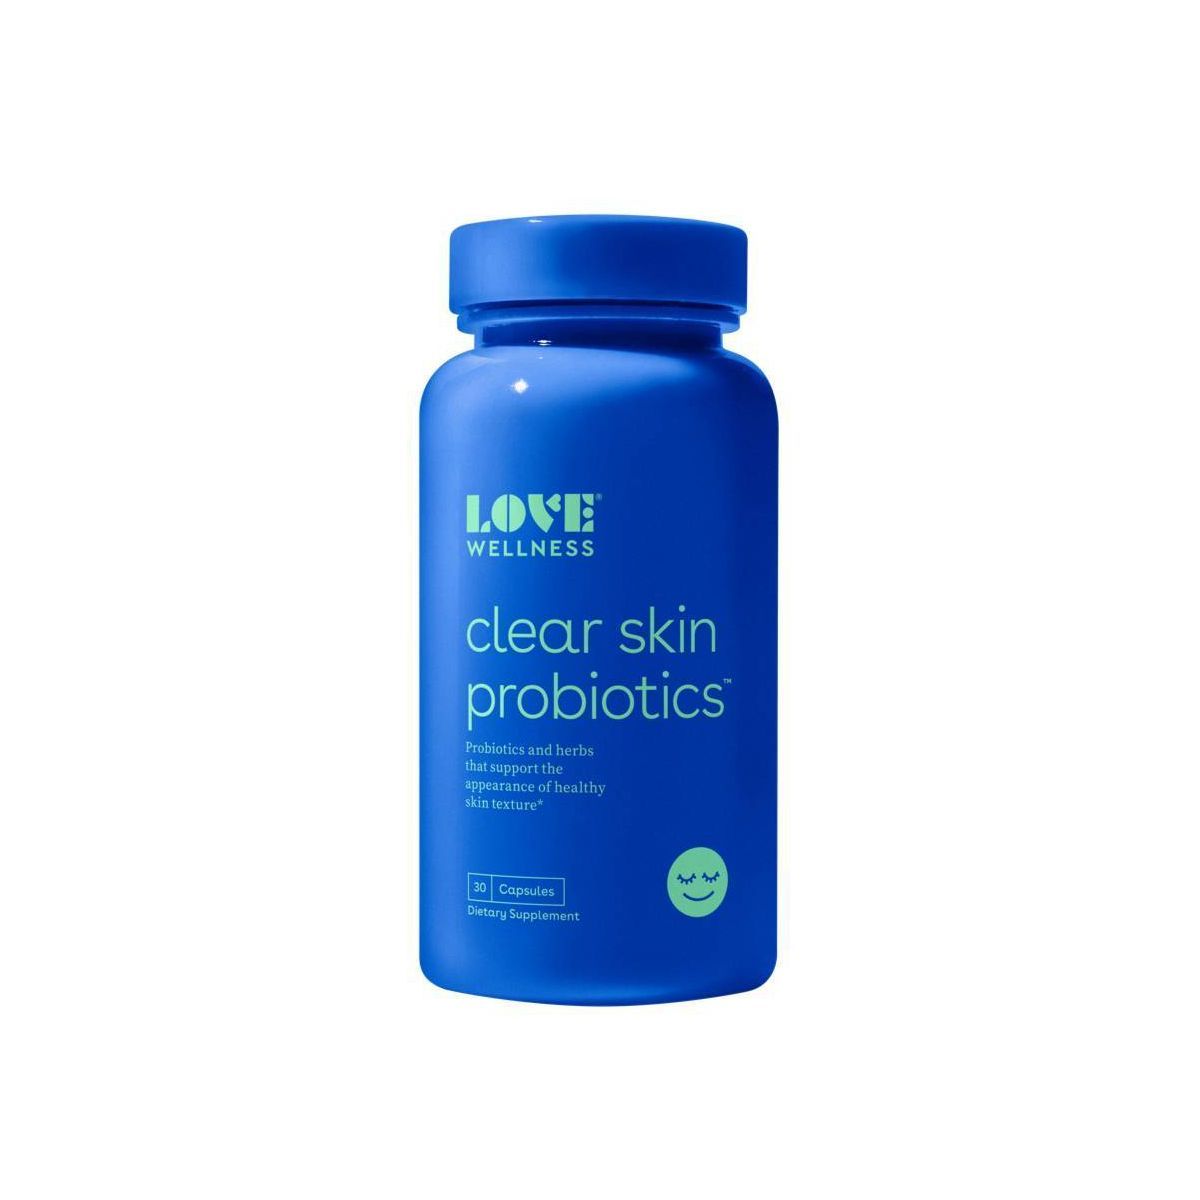 Love Wellness Clear Skin Probiotics for Clear and Healthy Skin - 30ct | Target